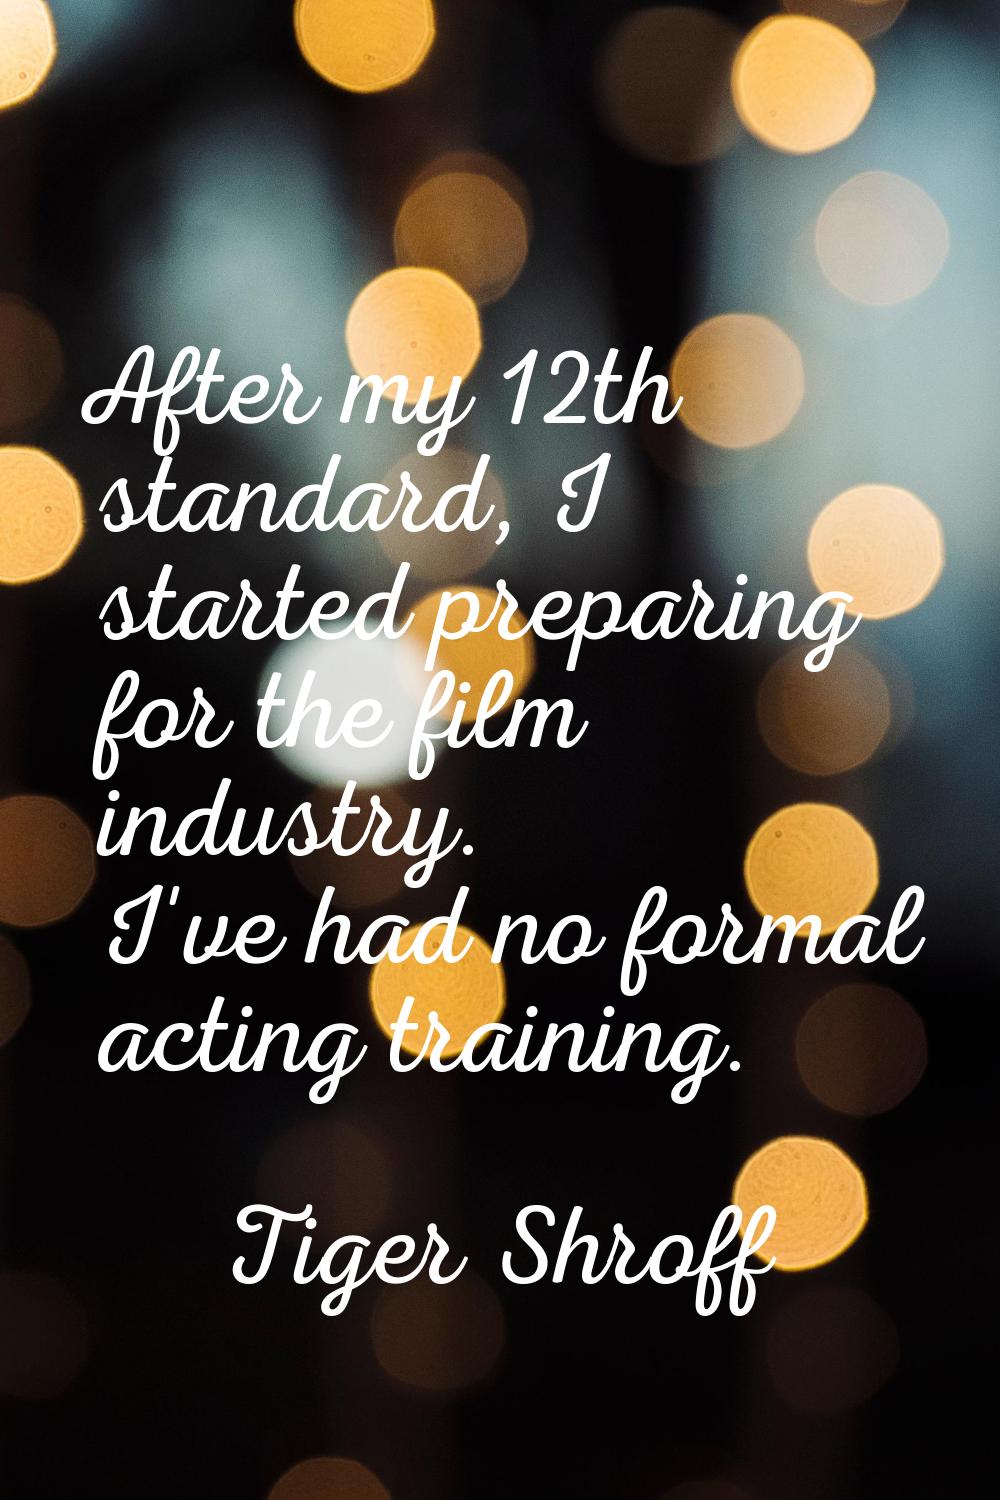 After my 12th standard, I started preparing for the film industry. I've had no formal acting traini